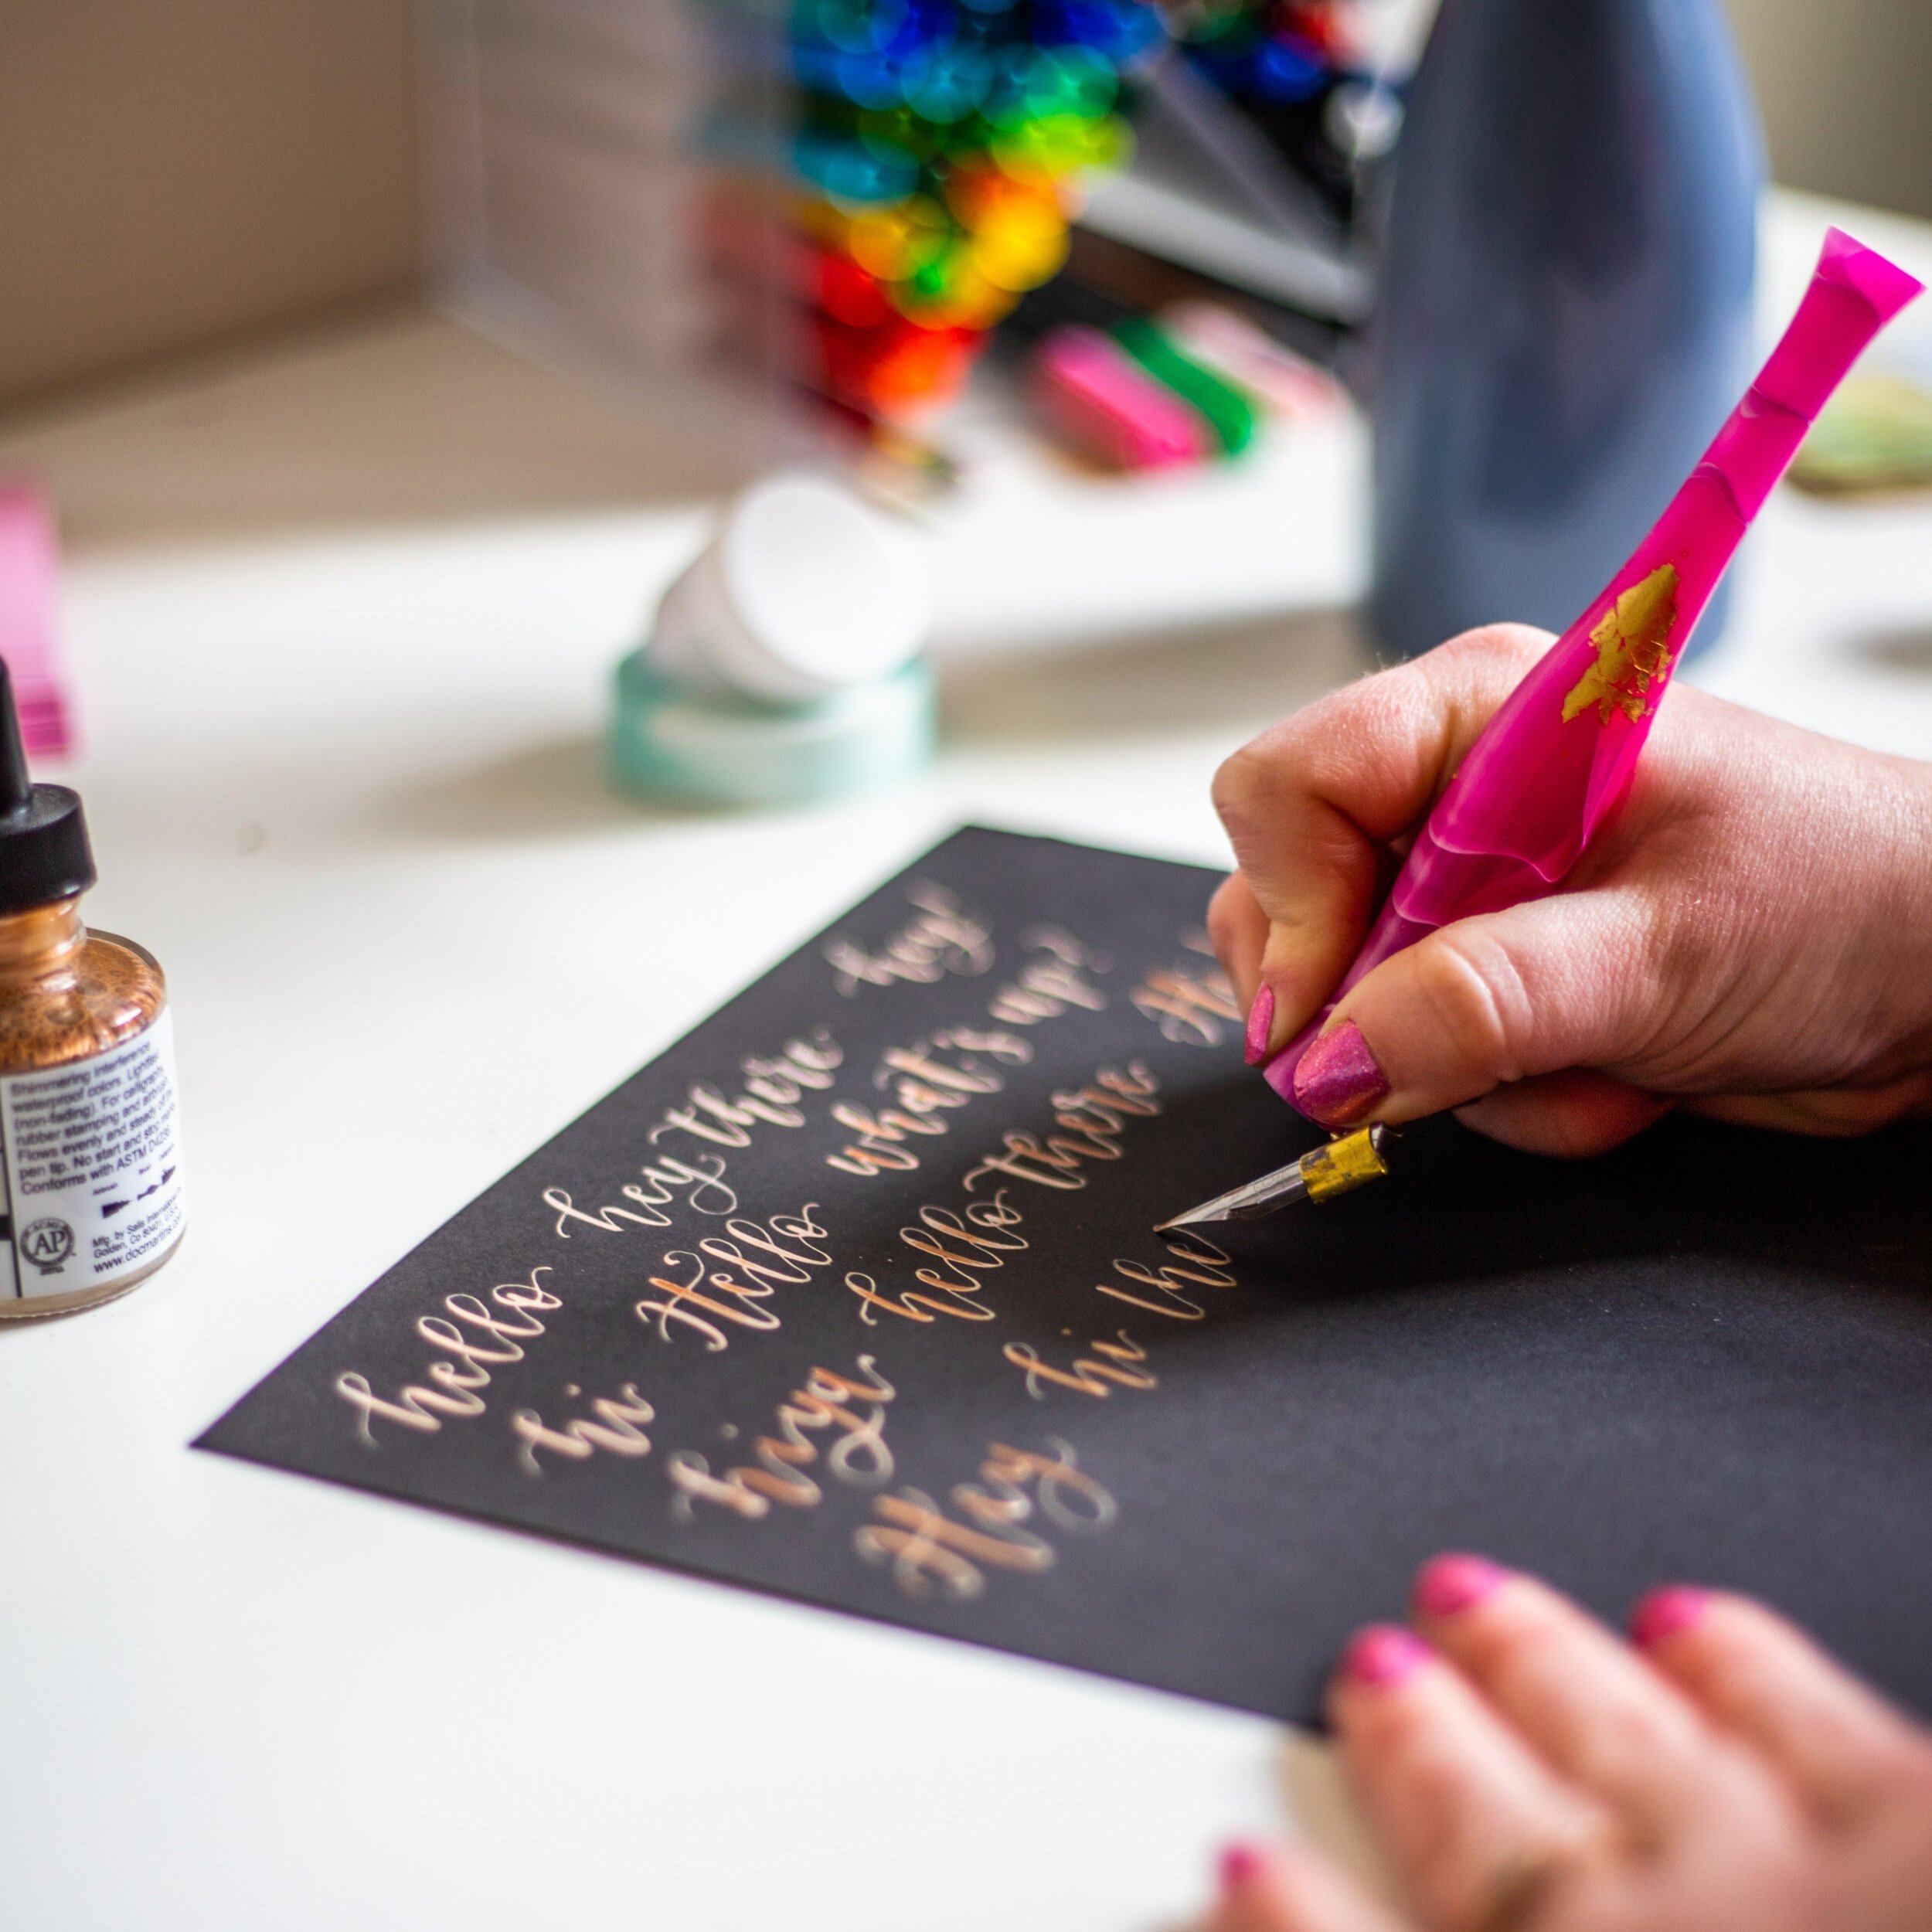 HOW TO: Use Bleedproof White Ink for Pointed Pen Calligraphy